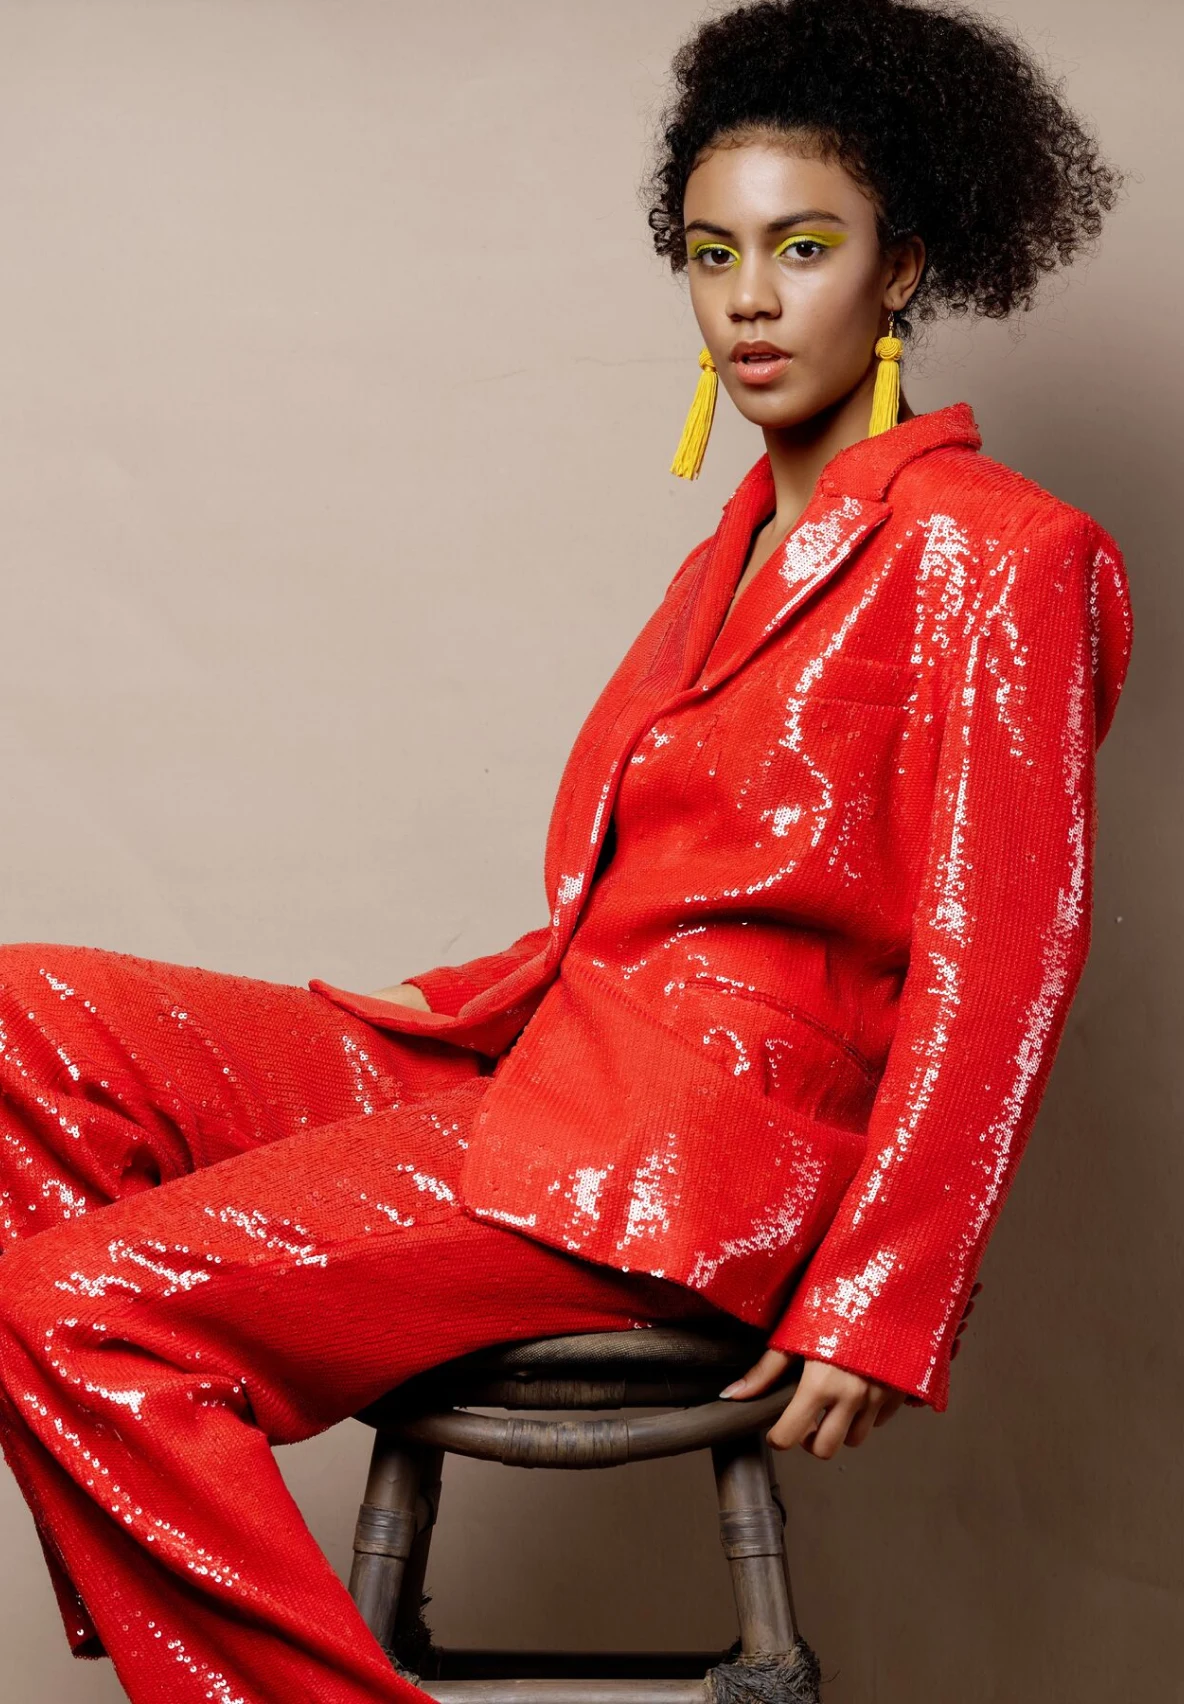 Image of a woman sitting on a wooden stool, wearing a red sequined suit. She is also wearing bright yellow dangling earrings and bright yellow liquid eyeshadow, with her hair tied up in a ponytail. 